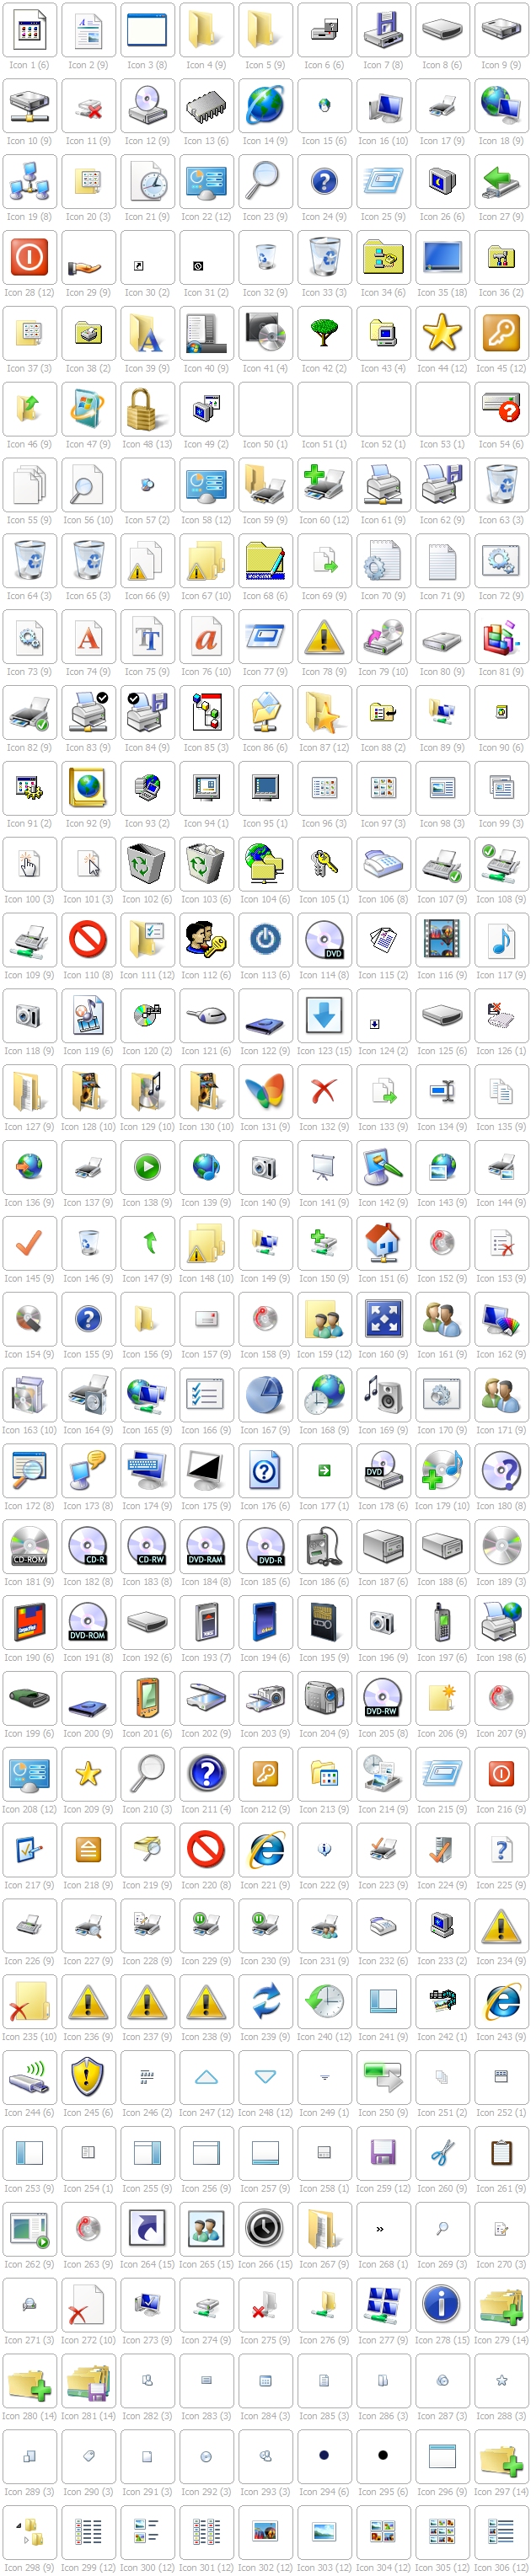 shell32.dll icons windows 10 download